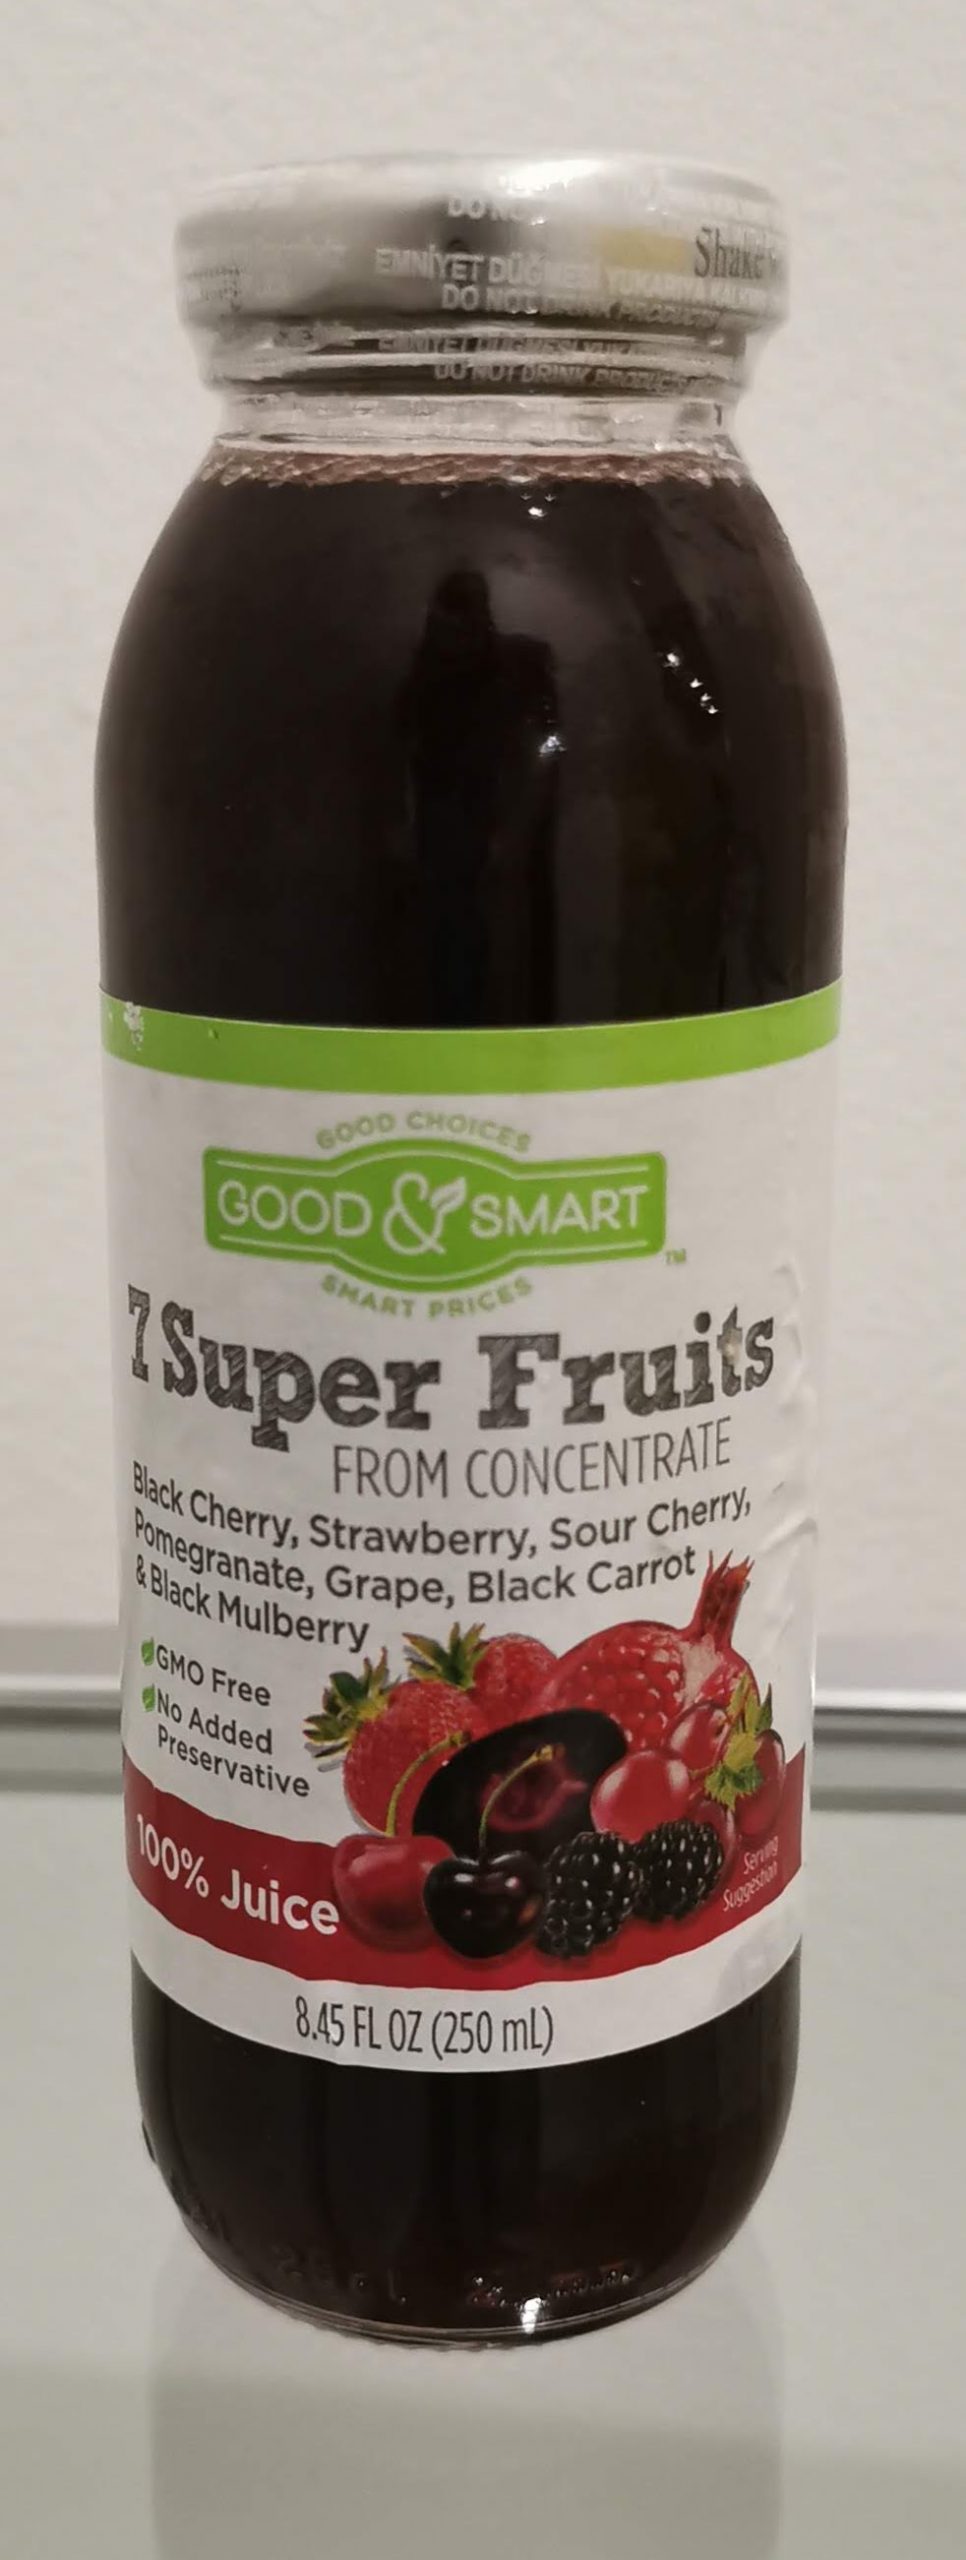 Read more about the article Good & Smart 7 Super Fruits 100% Juice Drink (Dollar General)